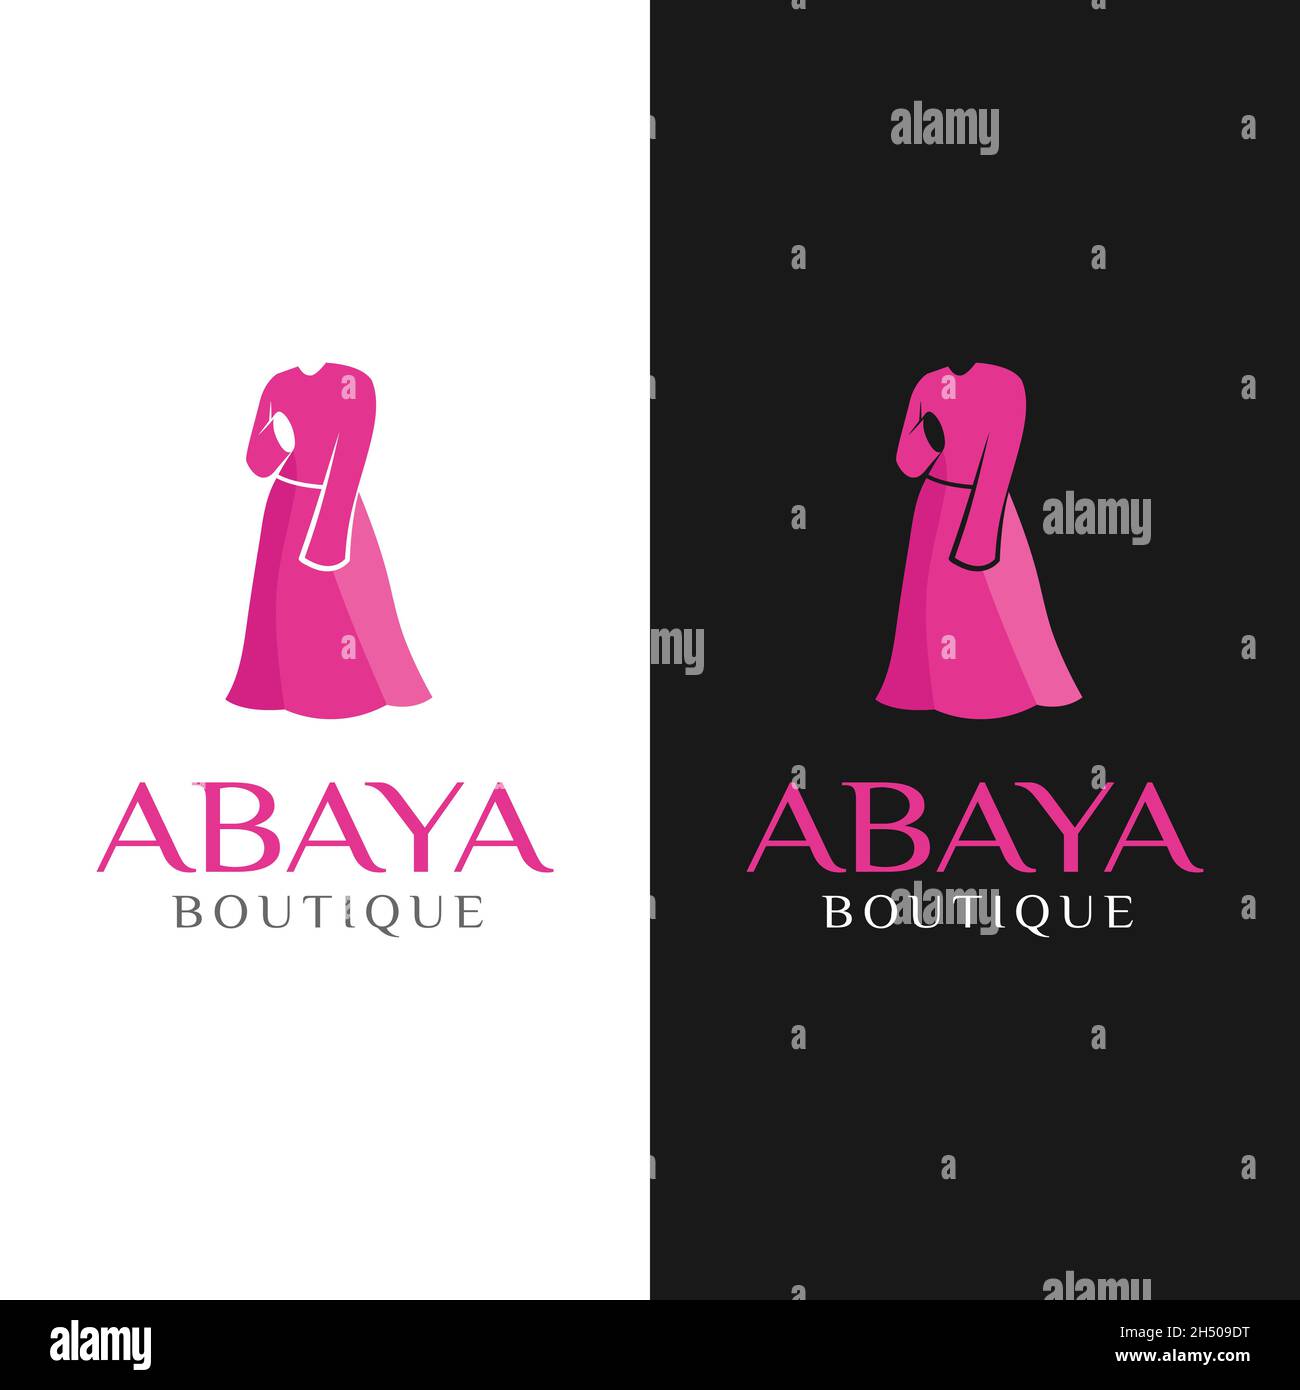 Abaya Long Dress Clothes for Muslim Woman Boutique Shop Business Brand Company in Modern Flat Style Logo Design Template. Stock Vector